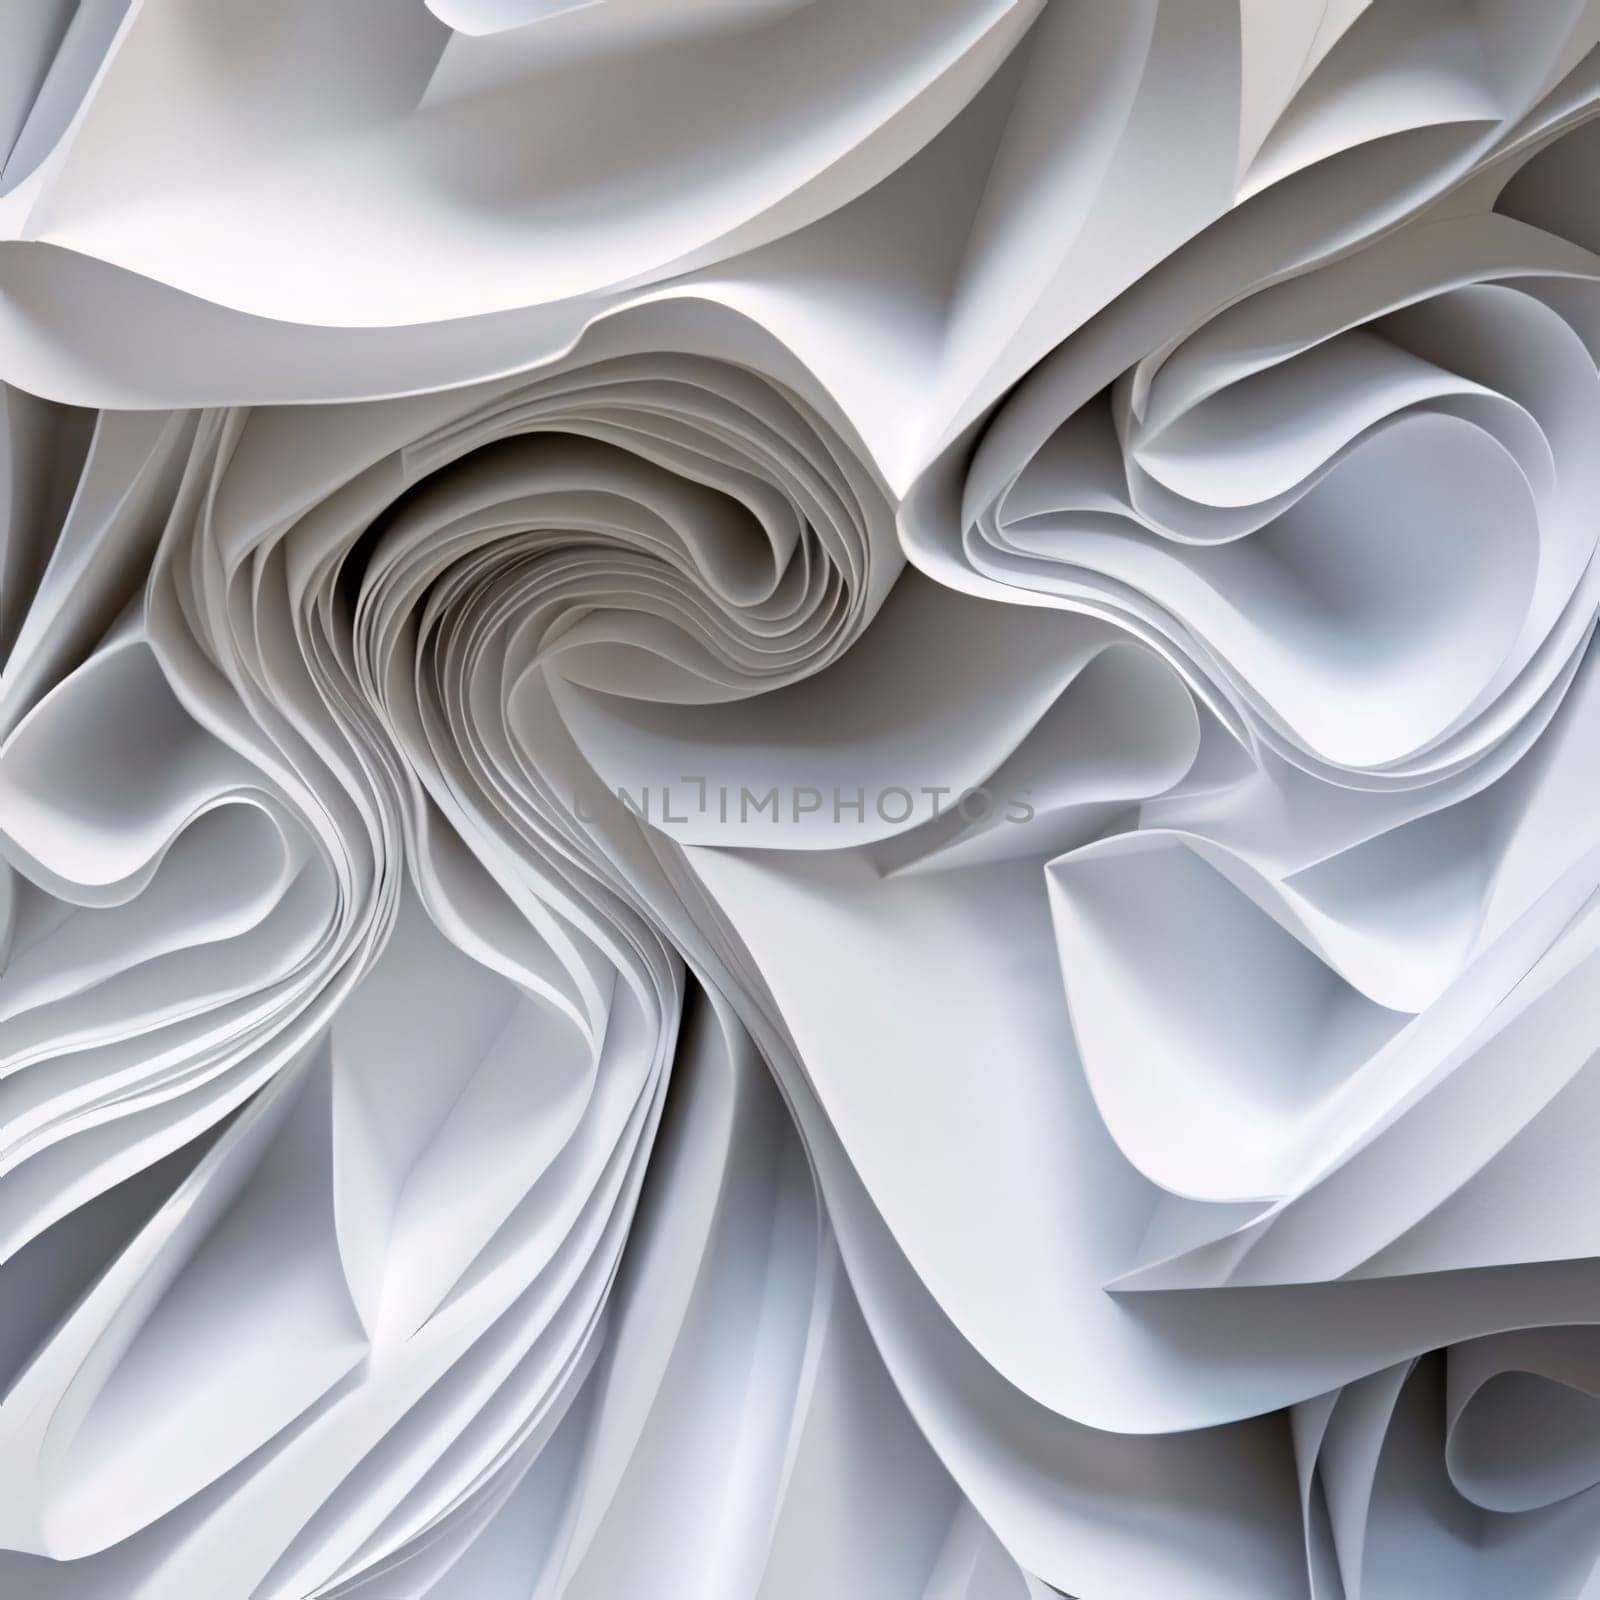 Abstract background design: 3d rendering, abstract background with wavy folds of white fabric